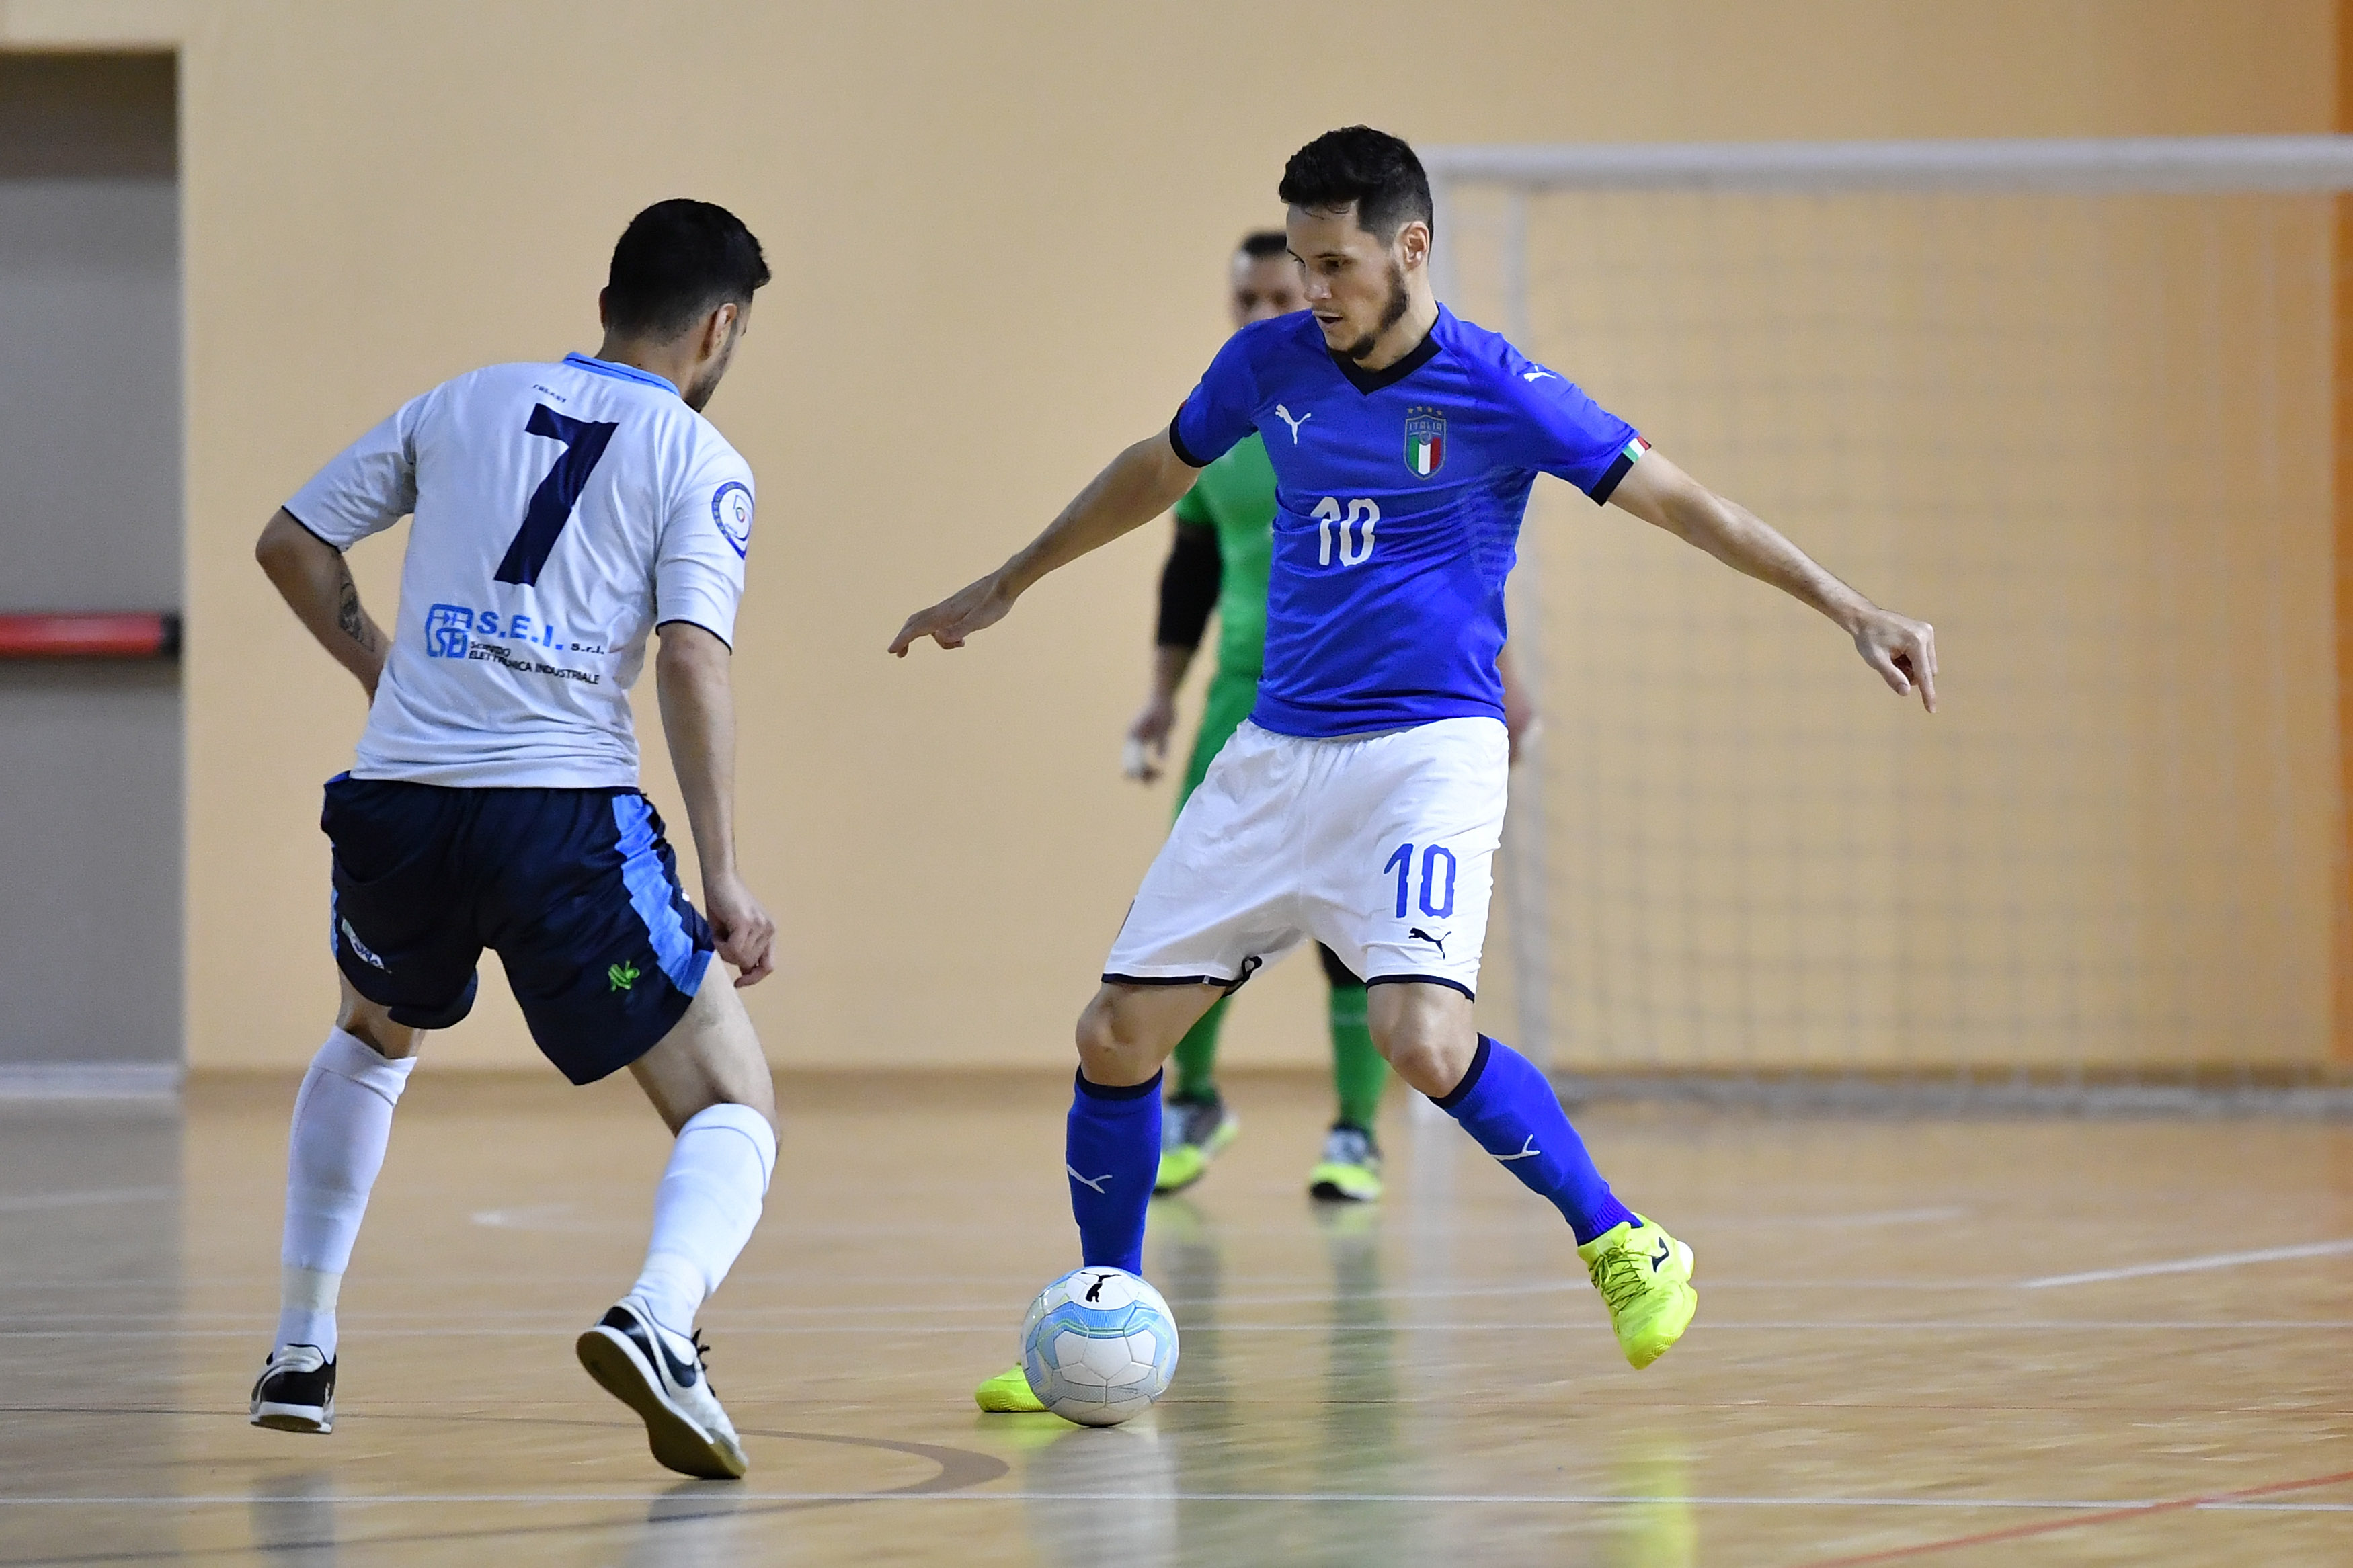 NOVARA, ITALY - JANUARY 31:  Alex Merlim of  Italy in action during the Futsal Friendly Match between Italy v Lecco at Novarello Training Center on January 31, 2019 in Novara, Italy.  (Photo by Valerio Pennicino/Getty Images)